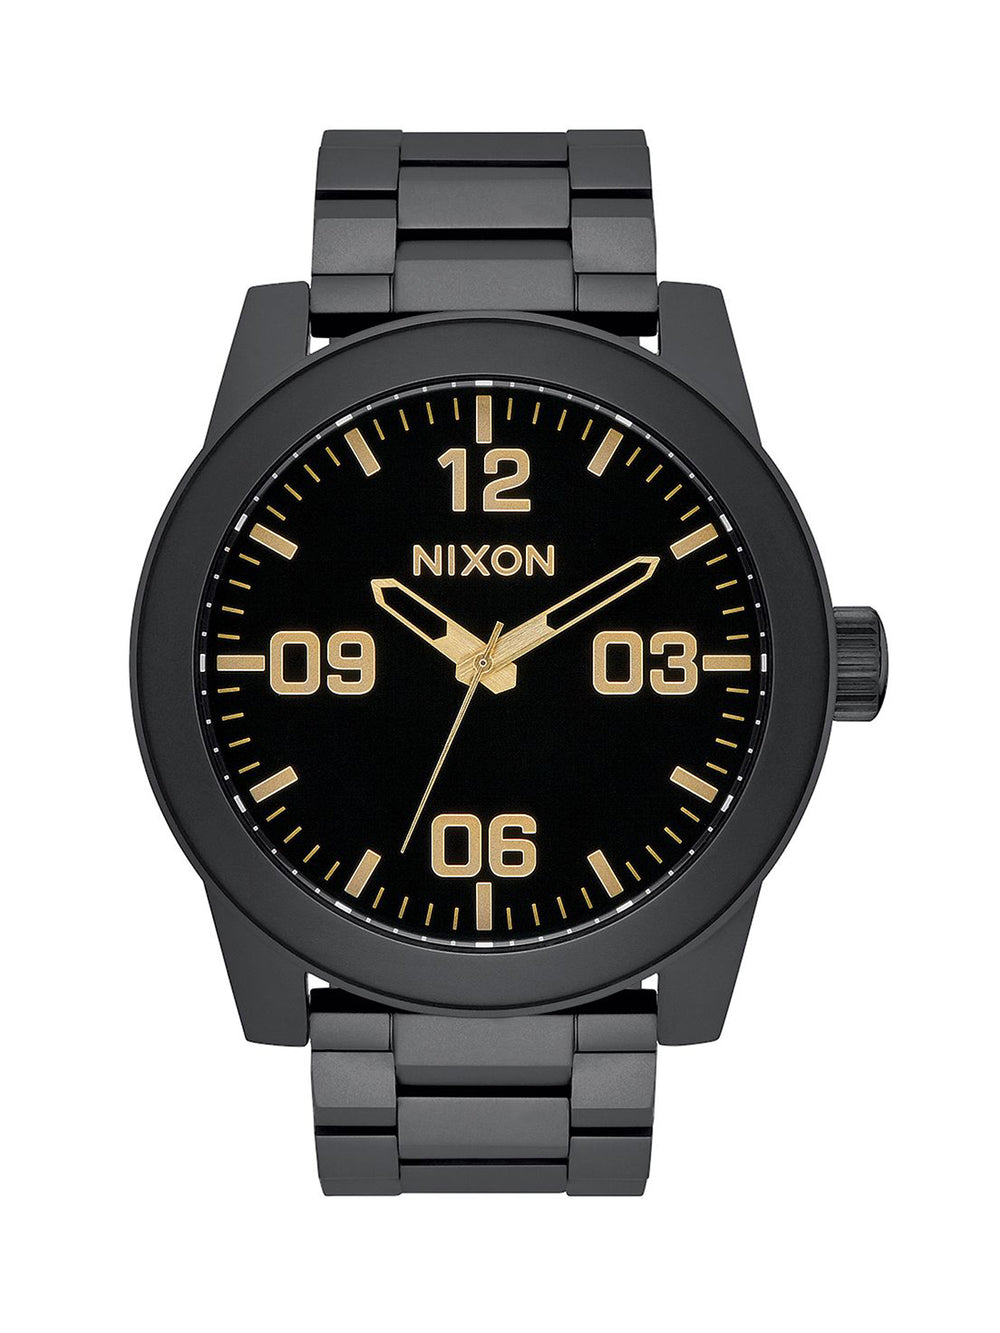 NIXON CORPORAL SS WATCH - CLEARANCE